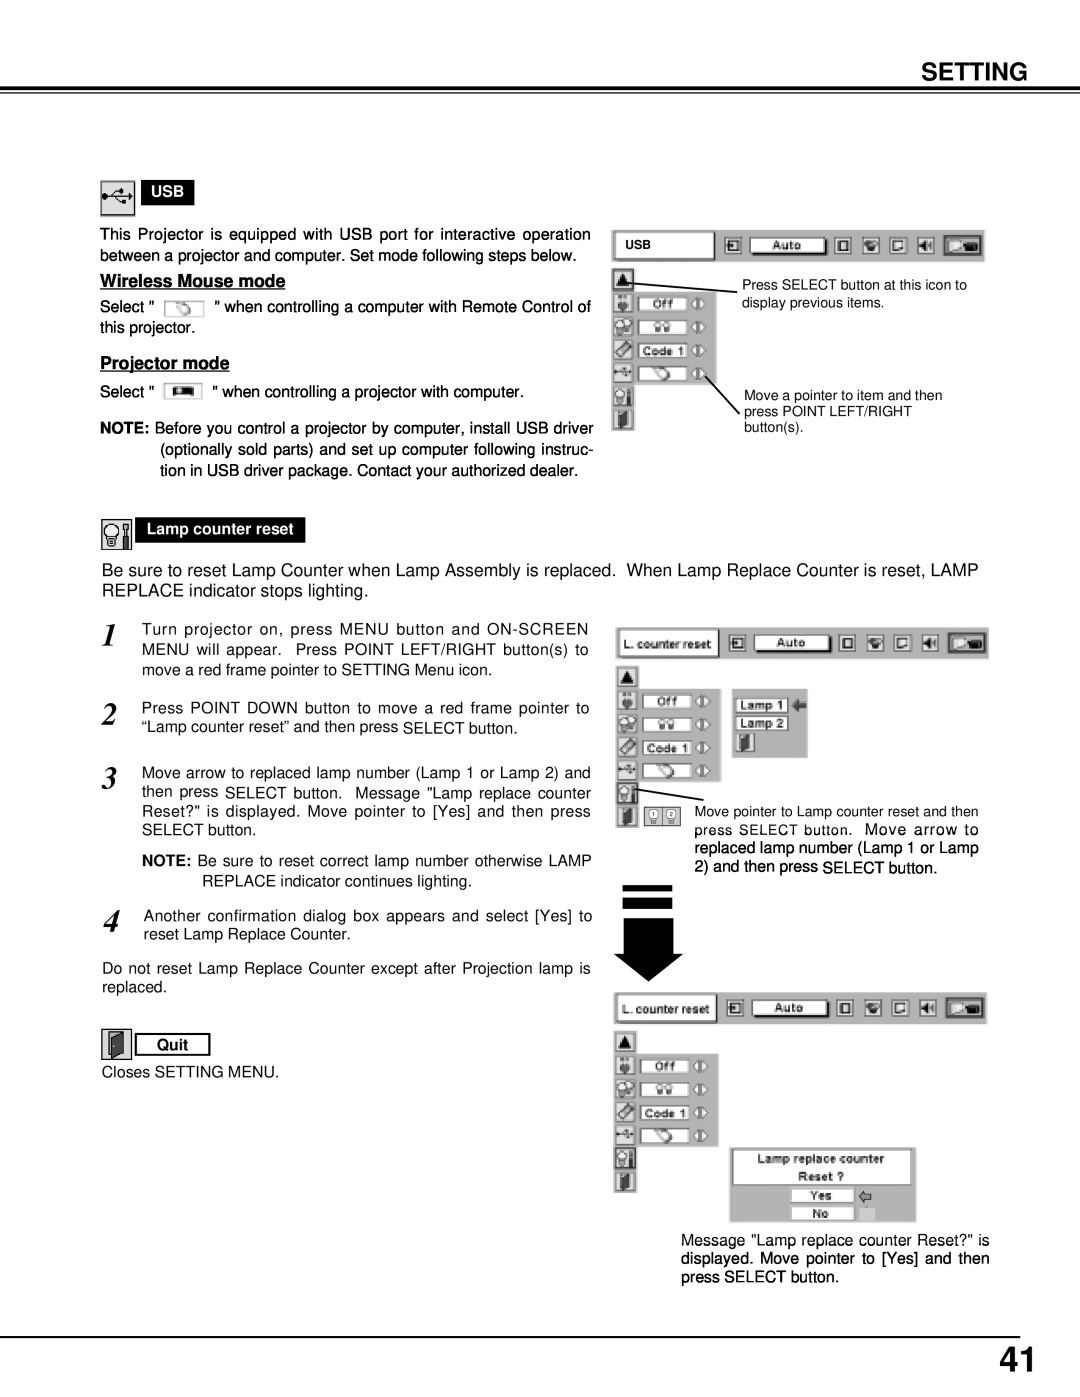 Christie Digital Systems 38-VIV301-01 user manual Setting, Wireless Mouse mode, Projector mode, Lamp counter reset 